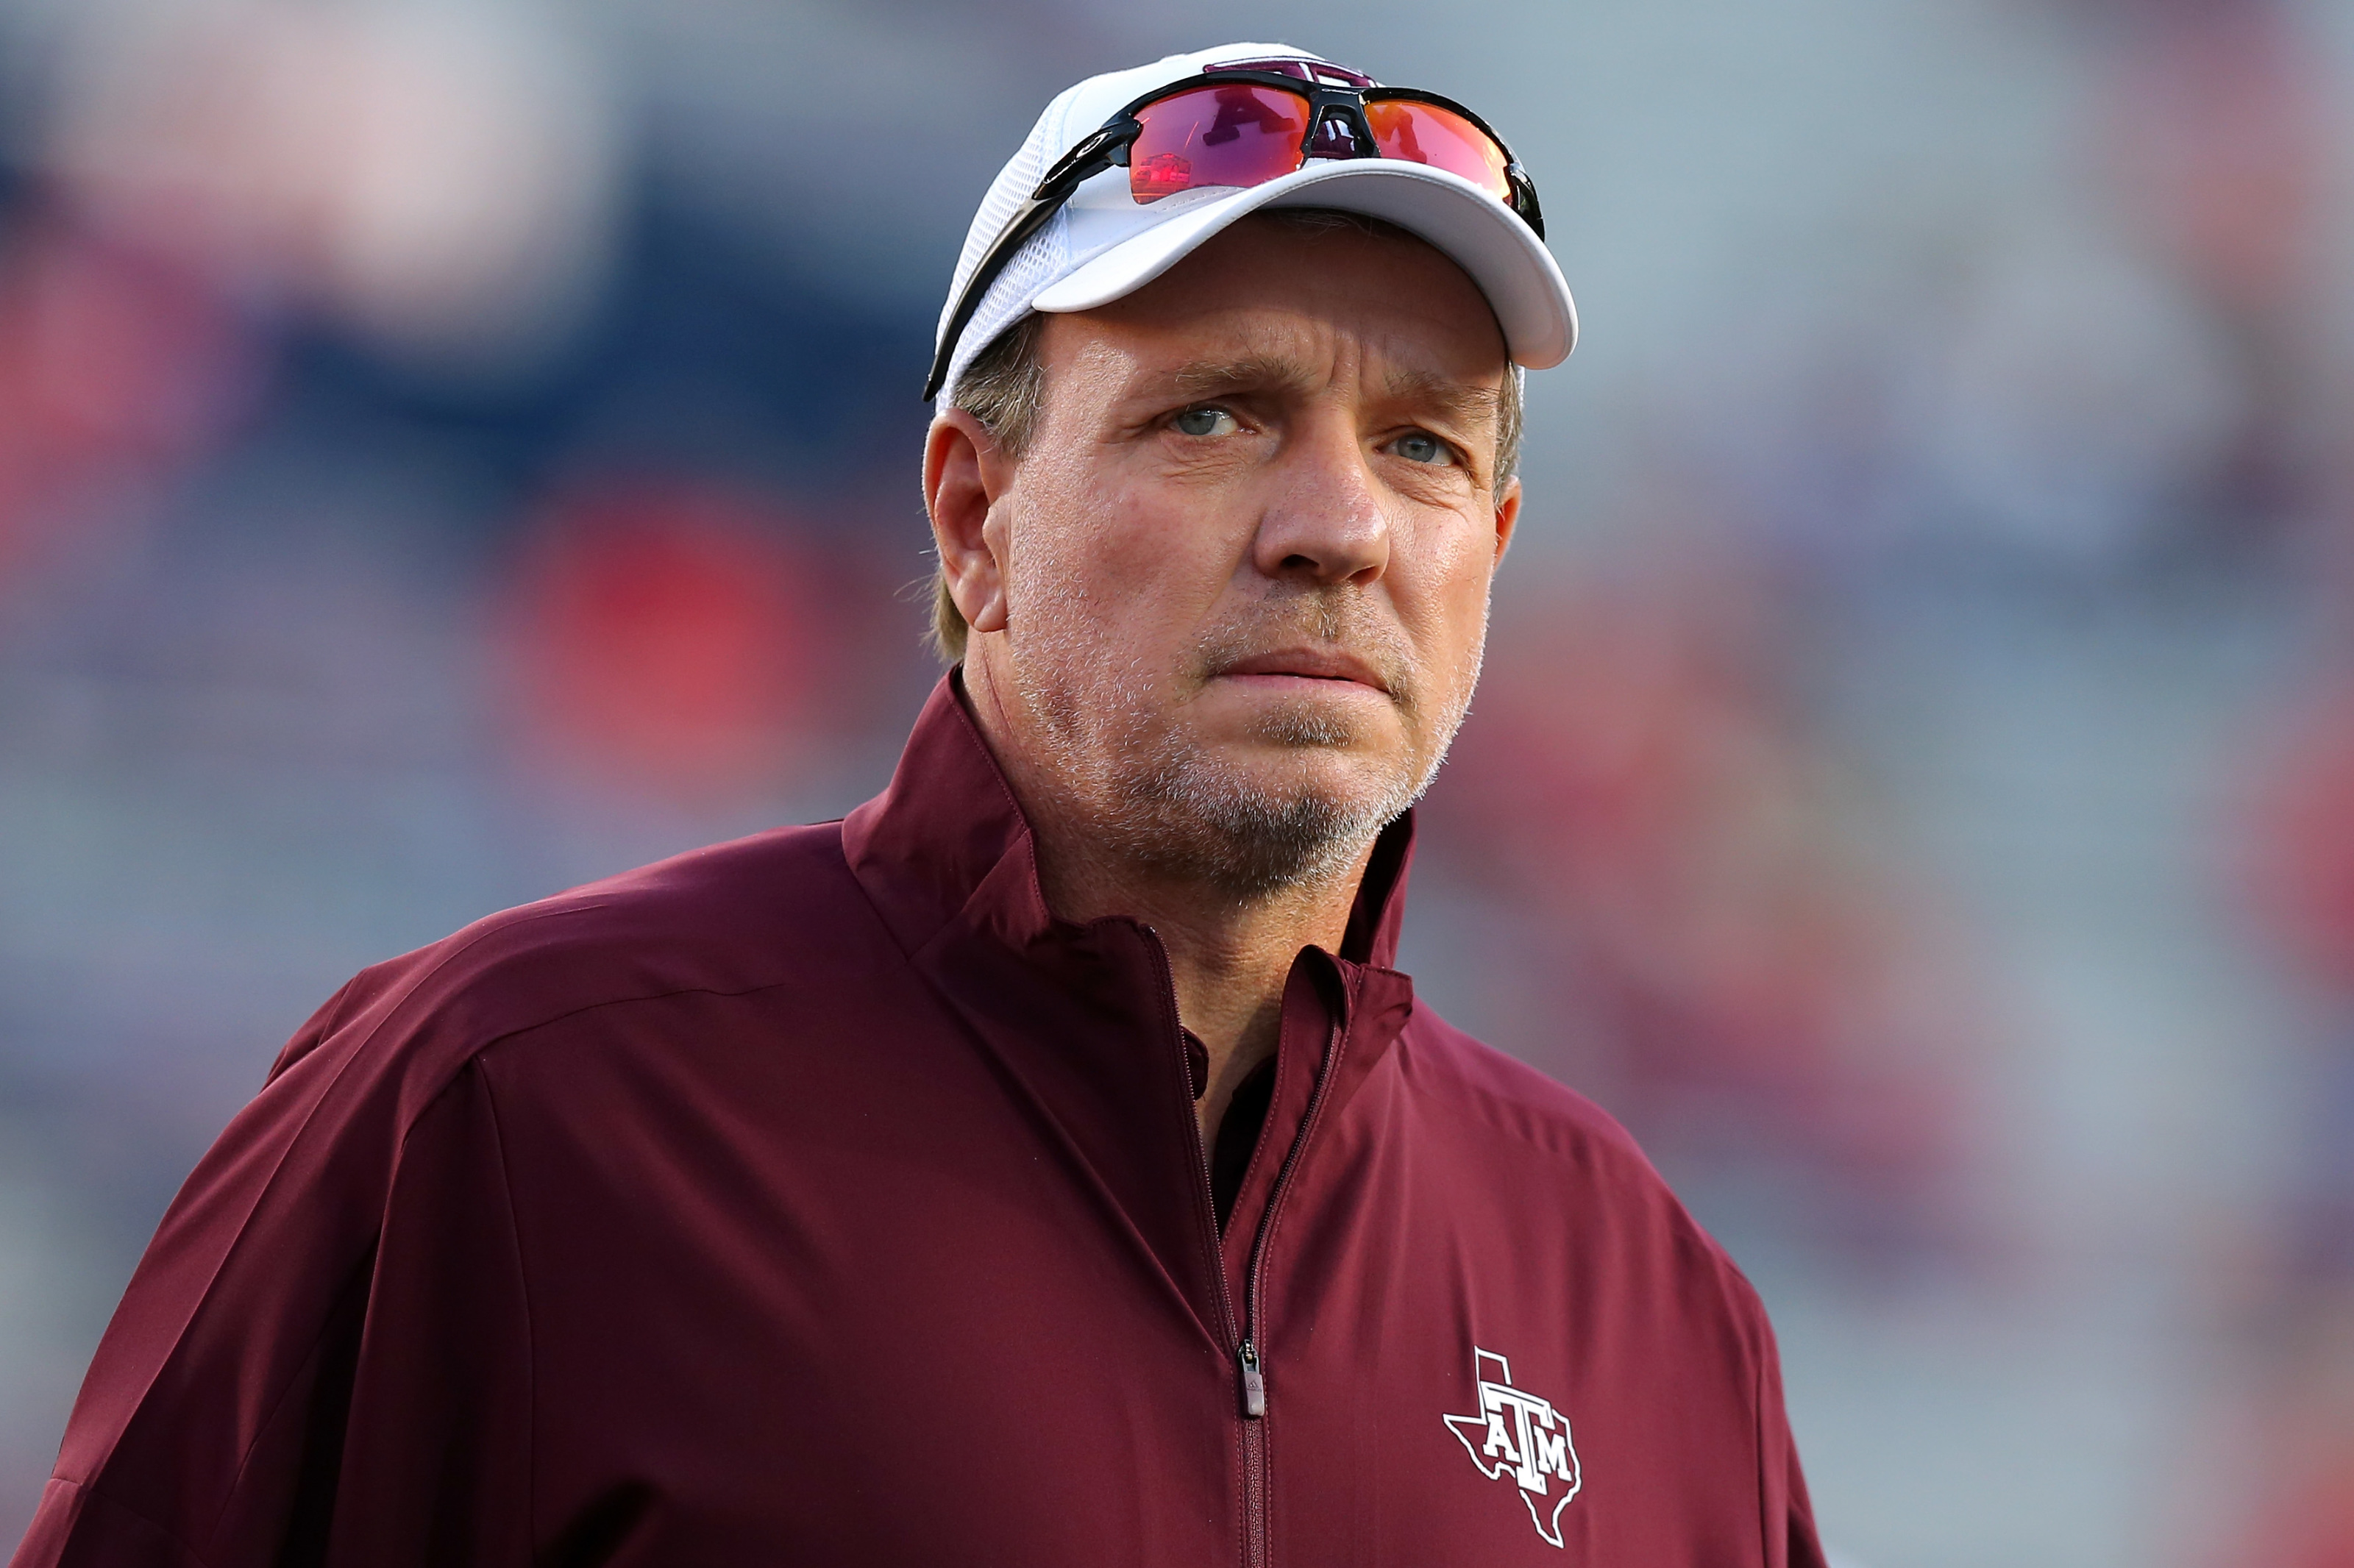 Texas A&M rolls out maroon carpet for coach-to-be Jimbo Fisher